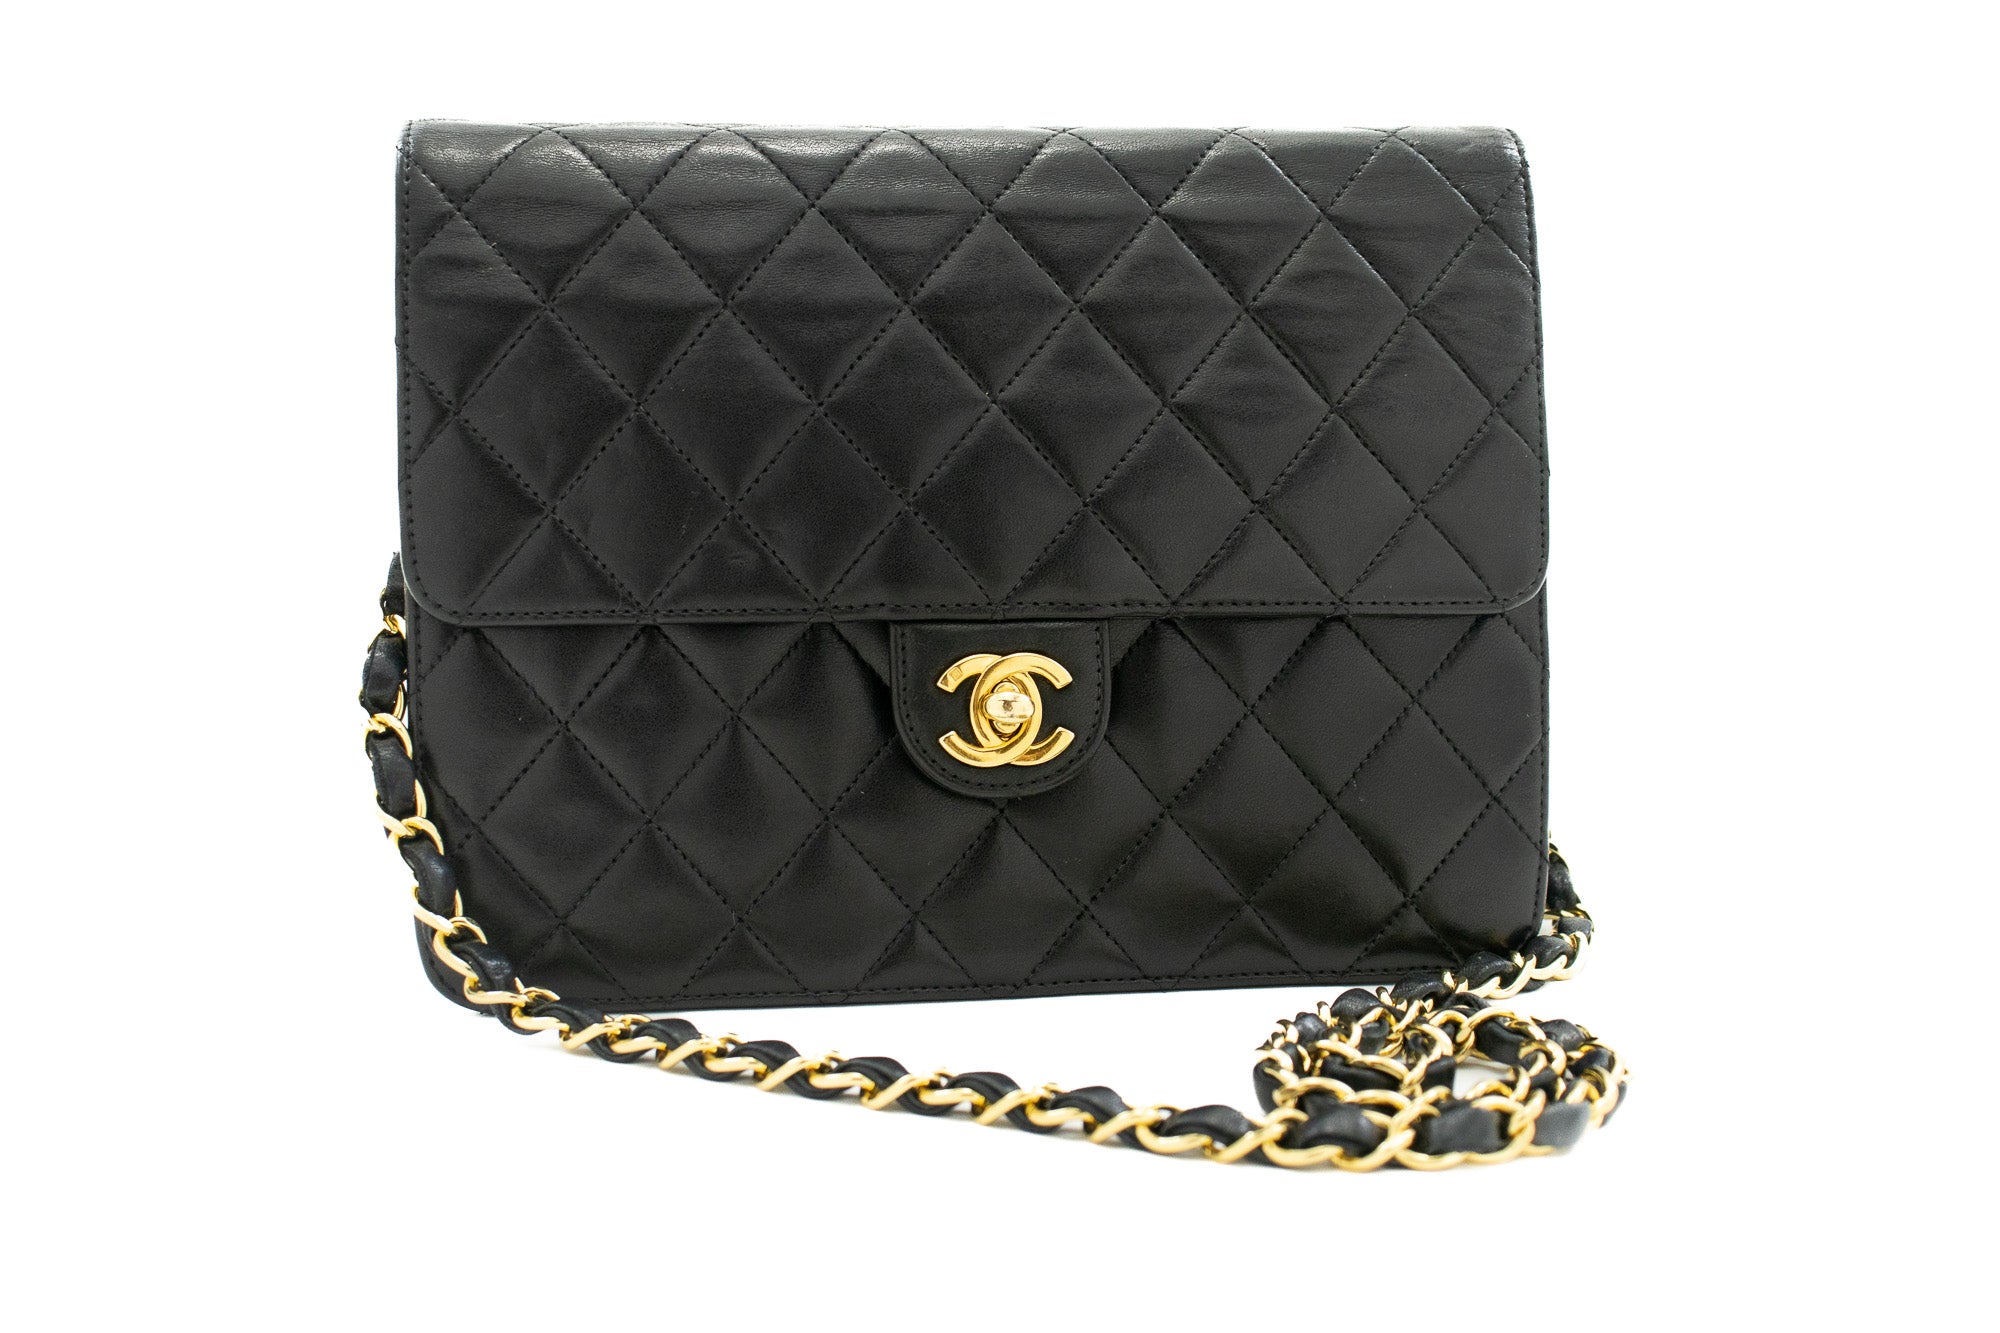 CHANEL Small Chain Shoulder Bag Black Quilted Flap Lambskin Purse